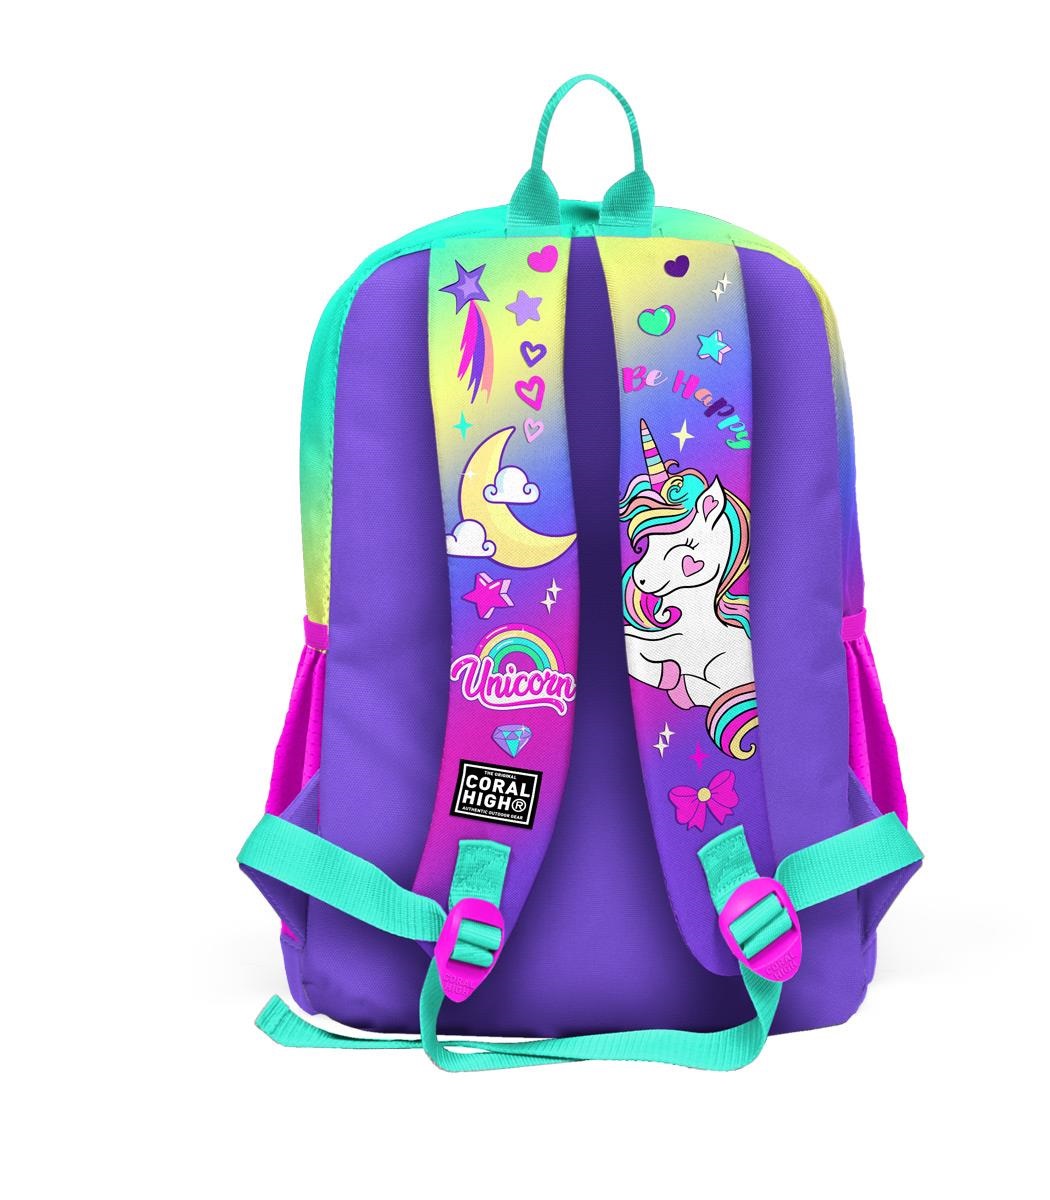 Coral High Kids Four Compartment School Backpack - Lavender Water Green Unicorn Patterned